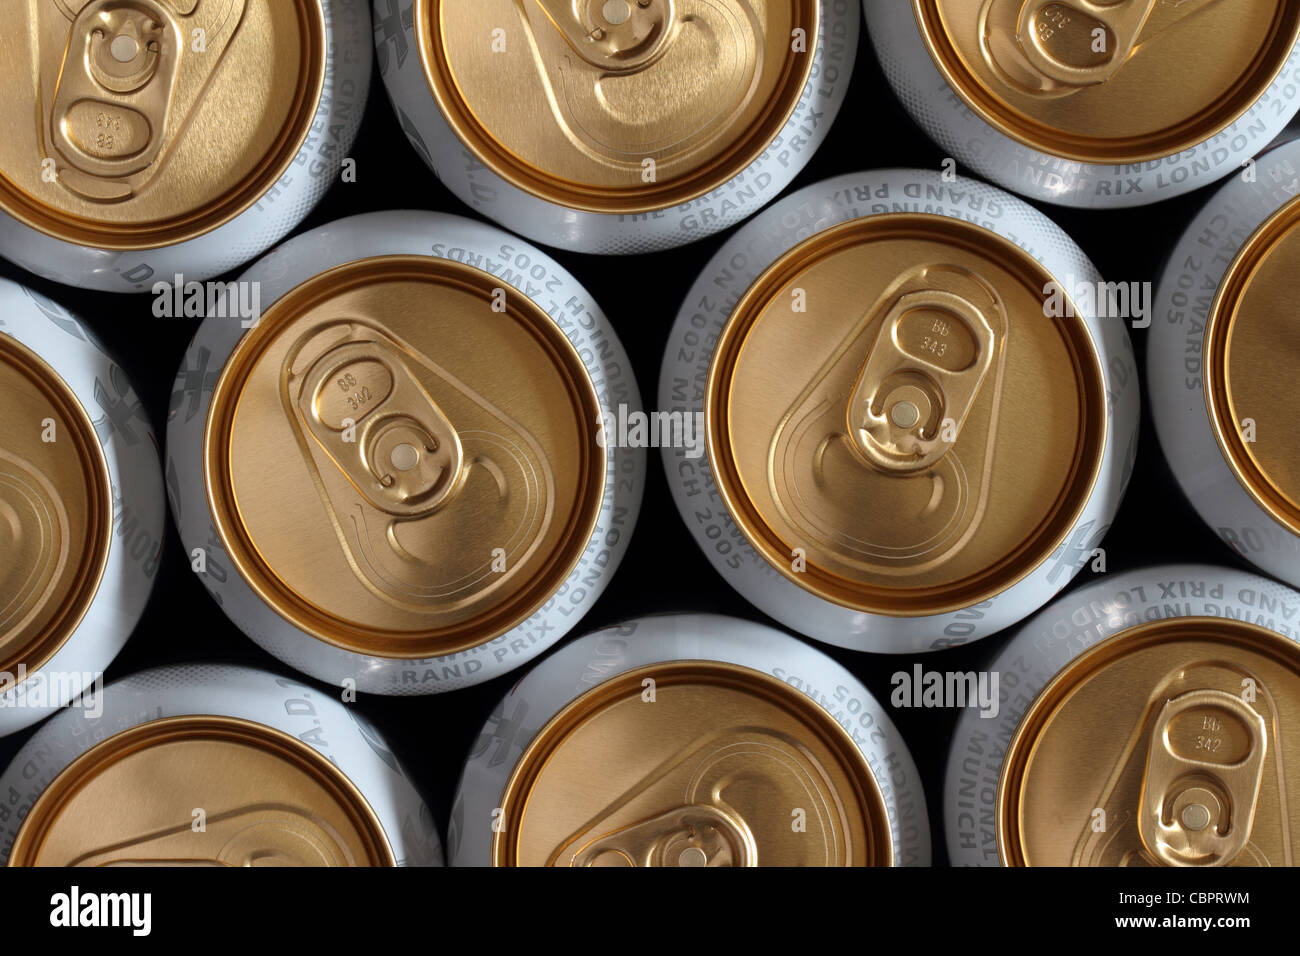 beer cans seen from the top Stock Photo